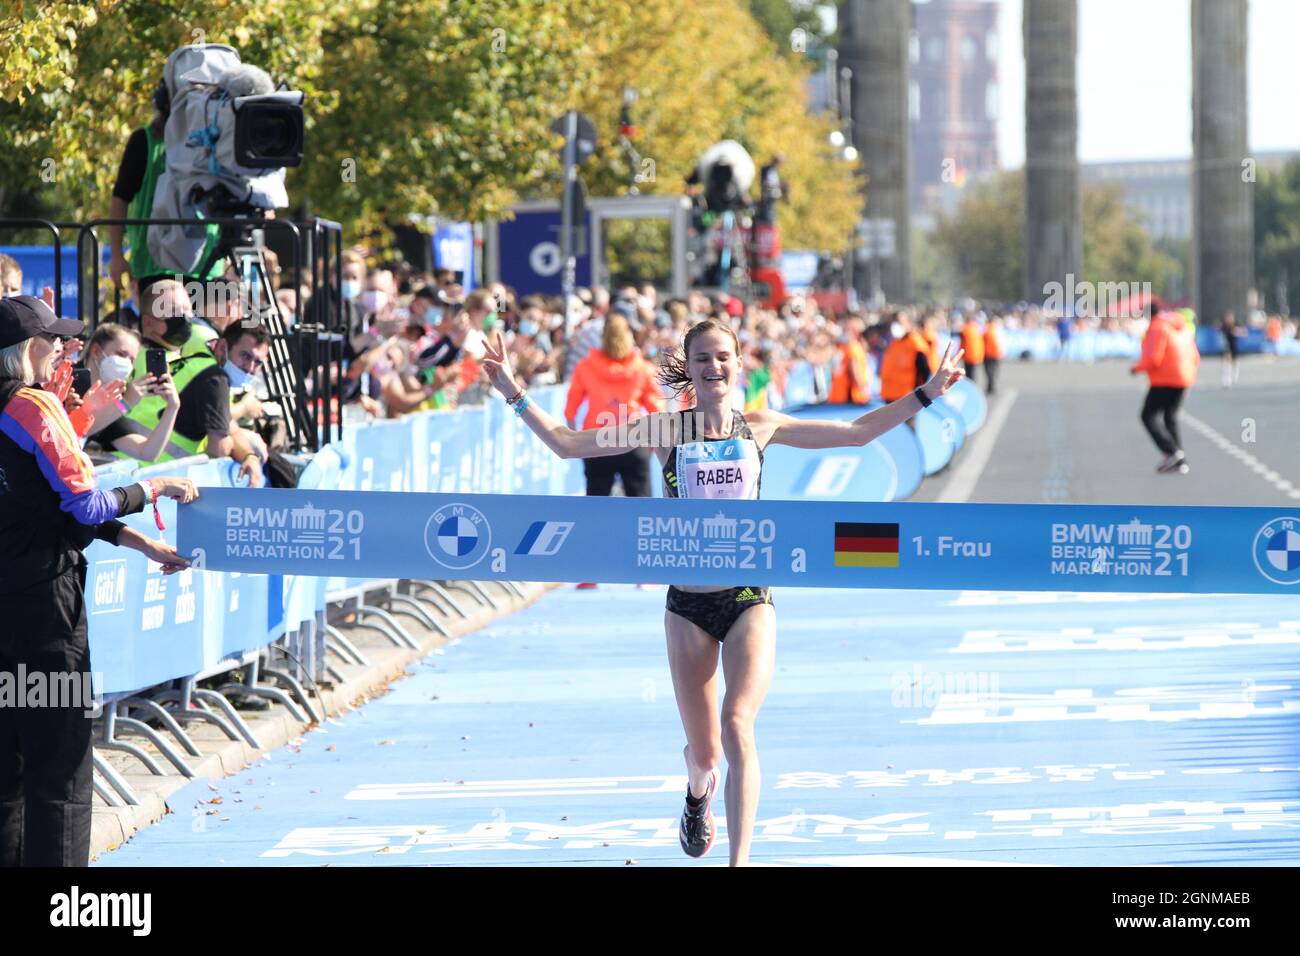 Berlin: Around 30,000 runners take part in the Berlin Marathon with start and finish at the Brandenburg Gate. The photo shows Rabea Schöneborn (Photo by Simone Kuhlmey/Pacific Press) Stock Photo